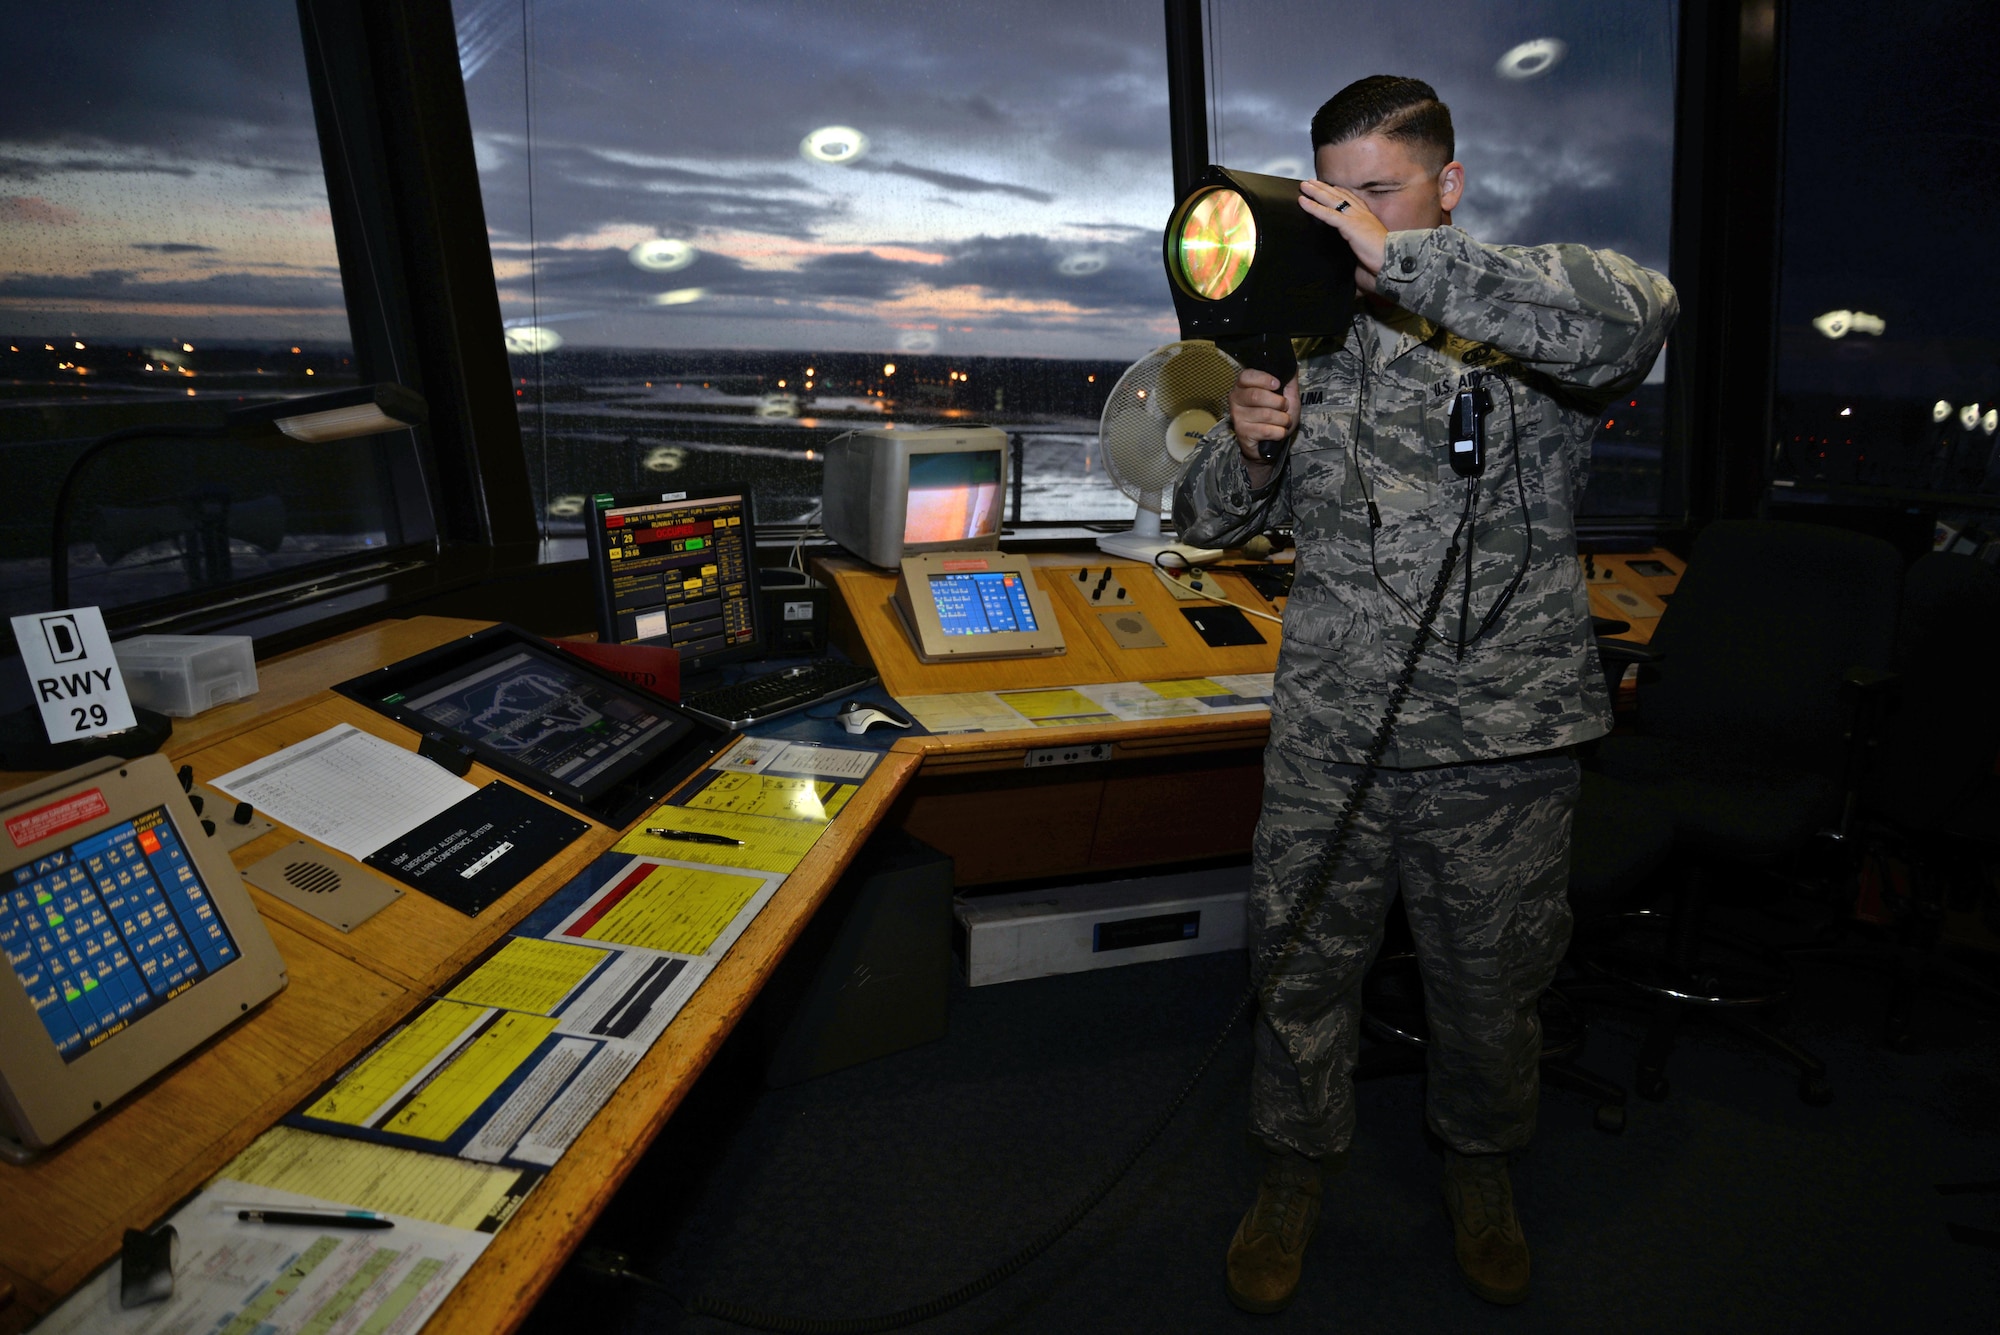 Senior Airman Drew Kalina, a 100th Operations Support Squadron air traffic controller, demonstrates how to use a light gun in the air traffic control tower Sept. 21, 2015, on Royal Air Force Mildenhall, England. A light gun is used when there is no way of communicating with pilots via radio. (U.S. Air Force photo/Senior Airman Christine Halan)